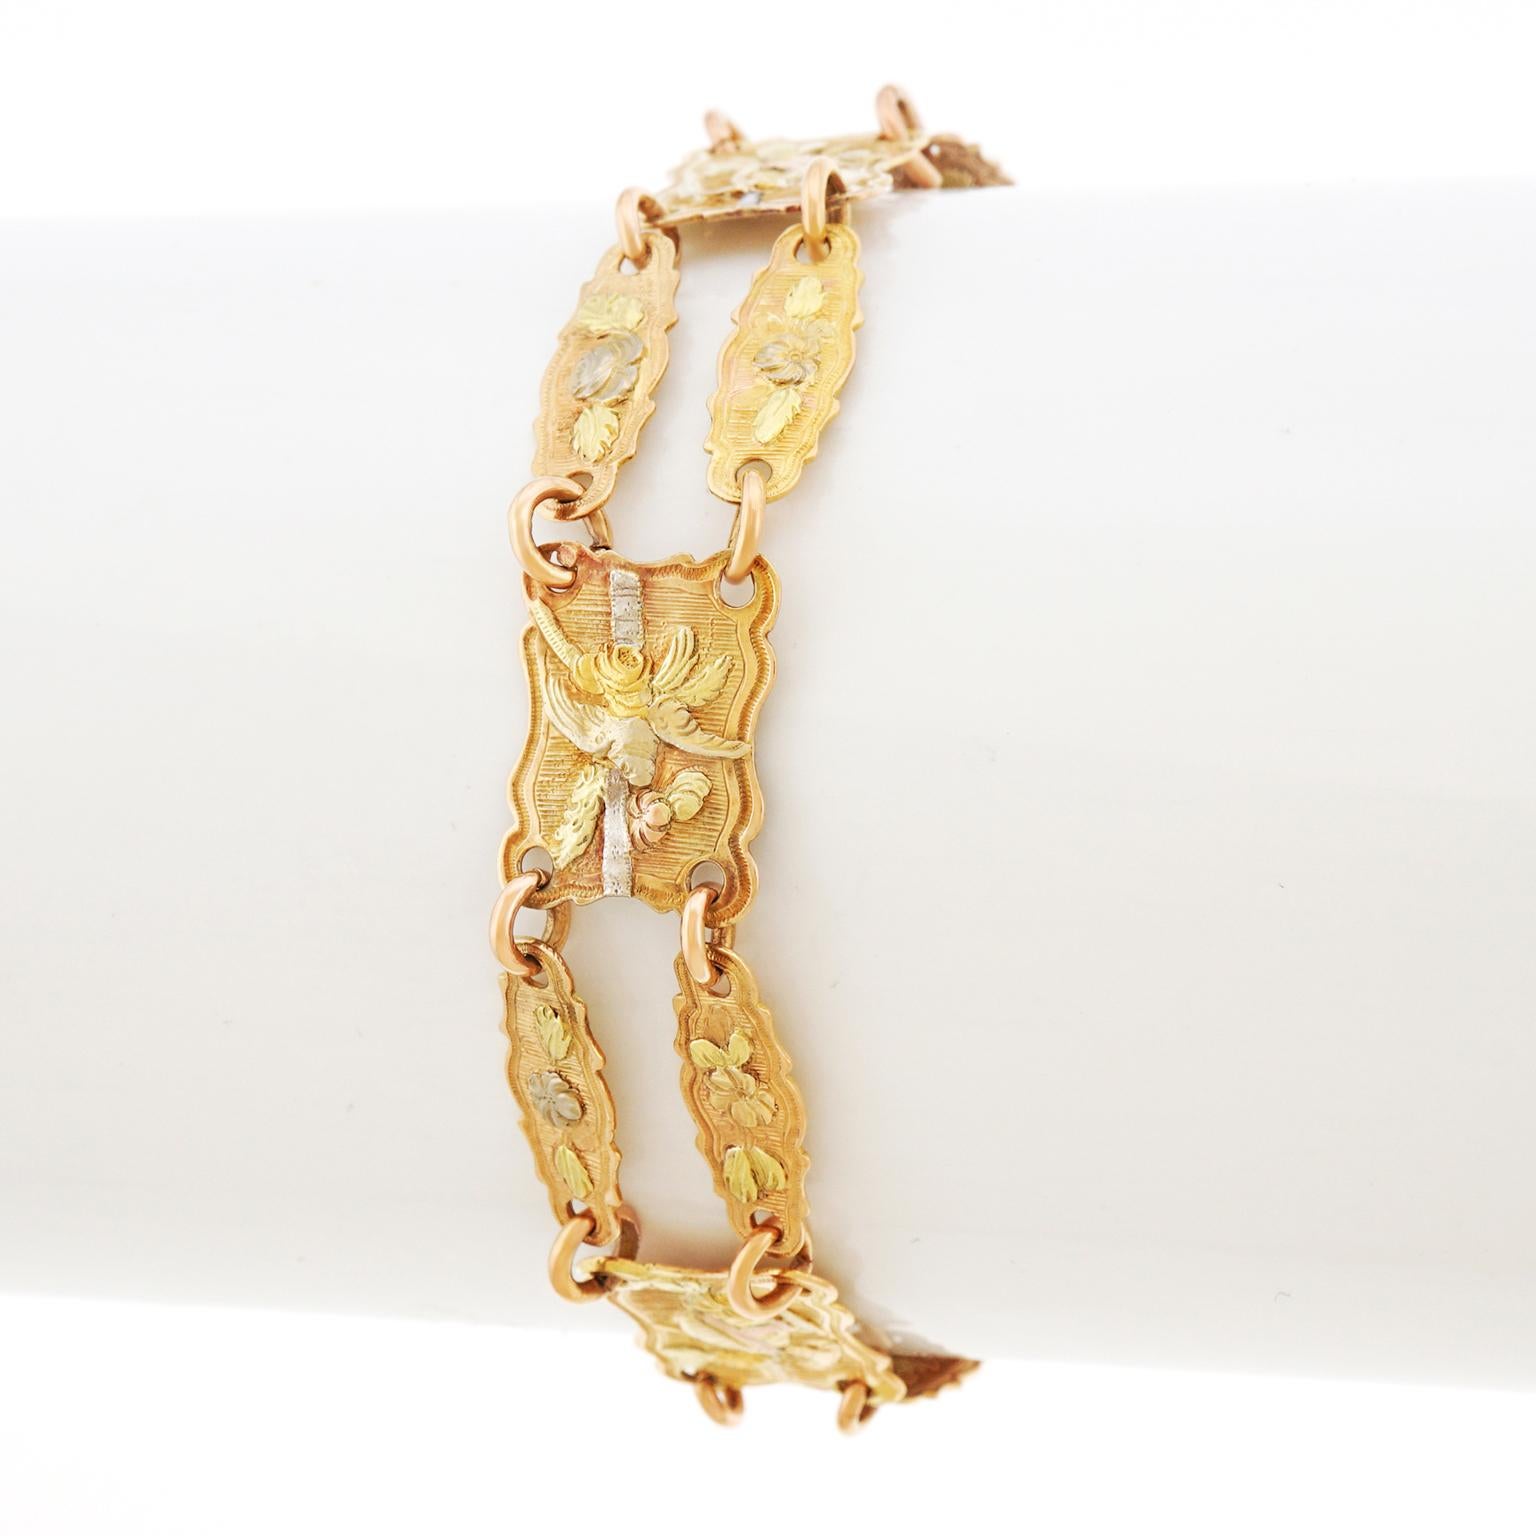 Victorian Antique Venetian Gold Bracelet with Spectacular Charm